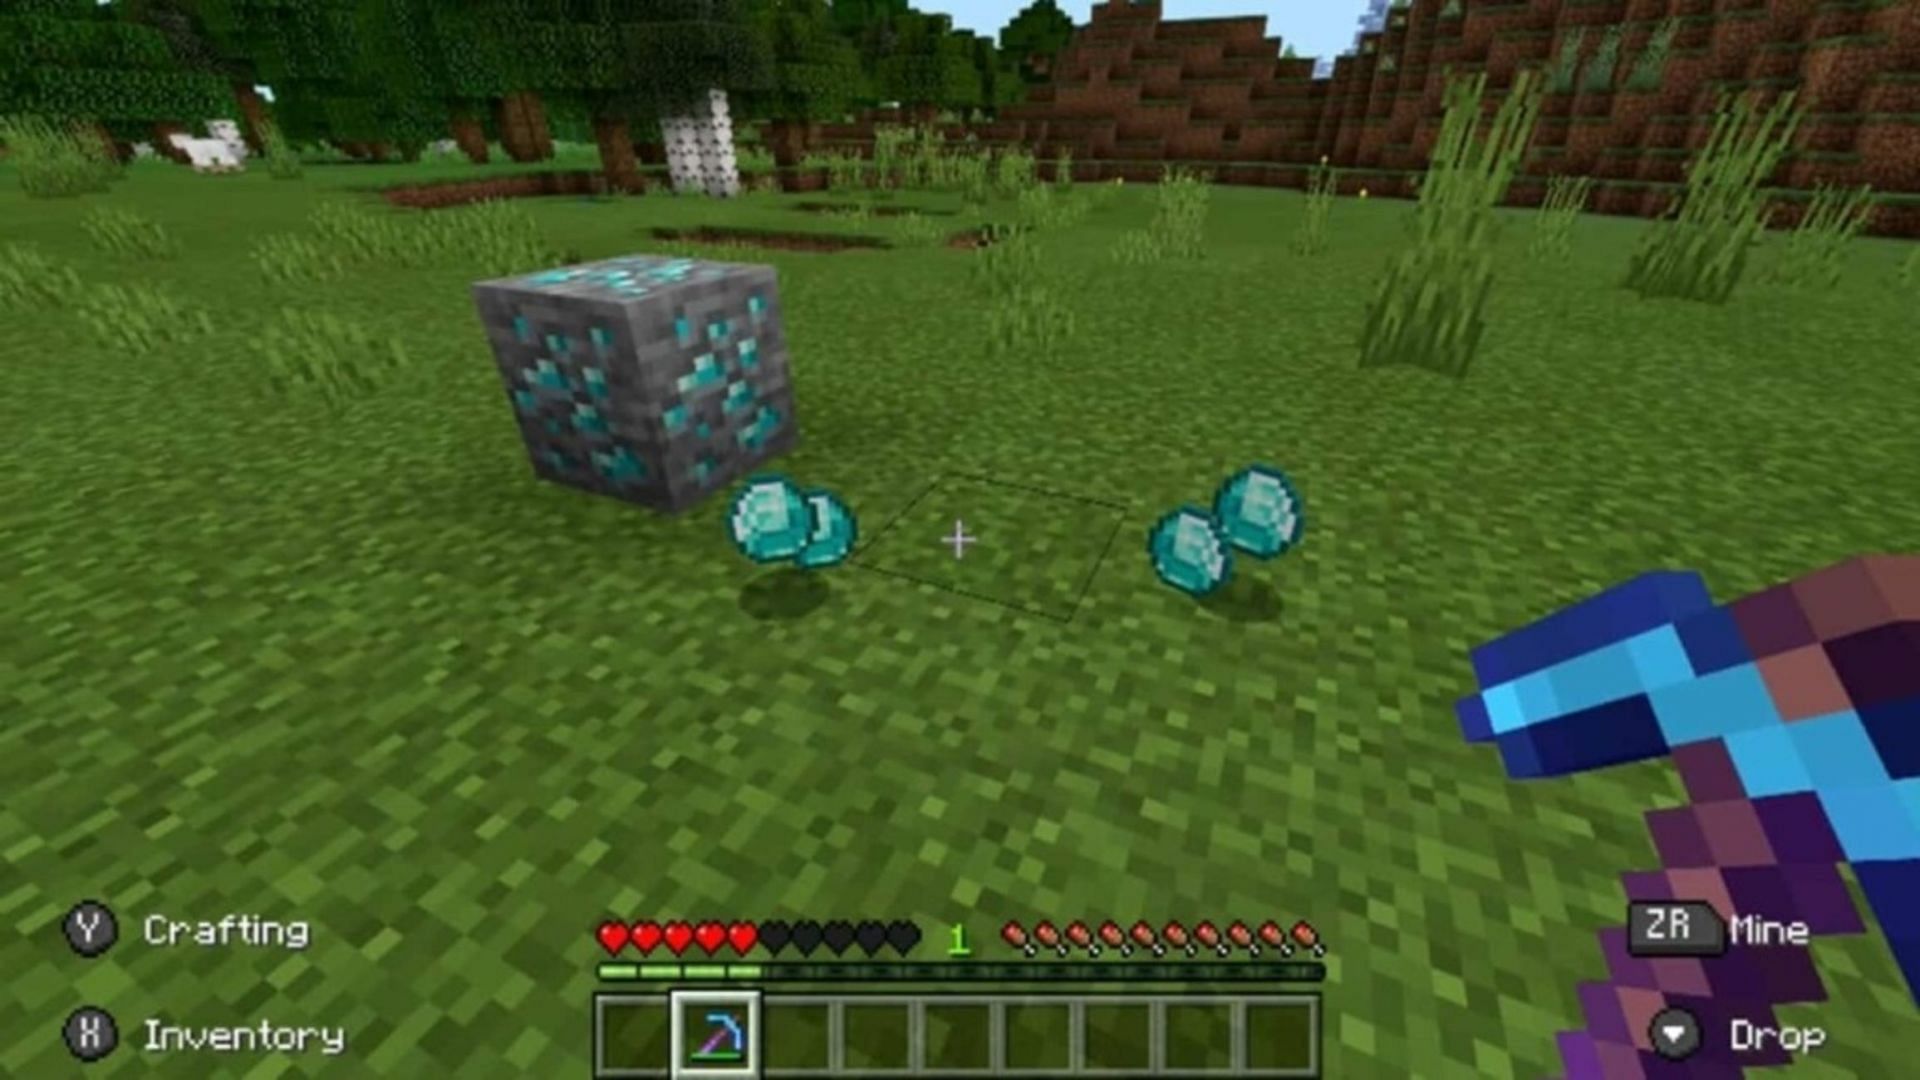 Players can get extra item drops by using Fortune (Image via Mojang)